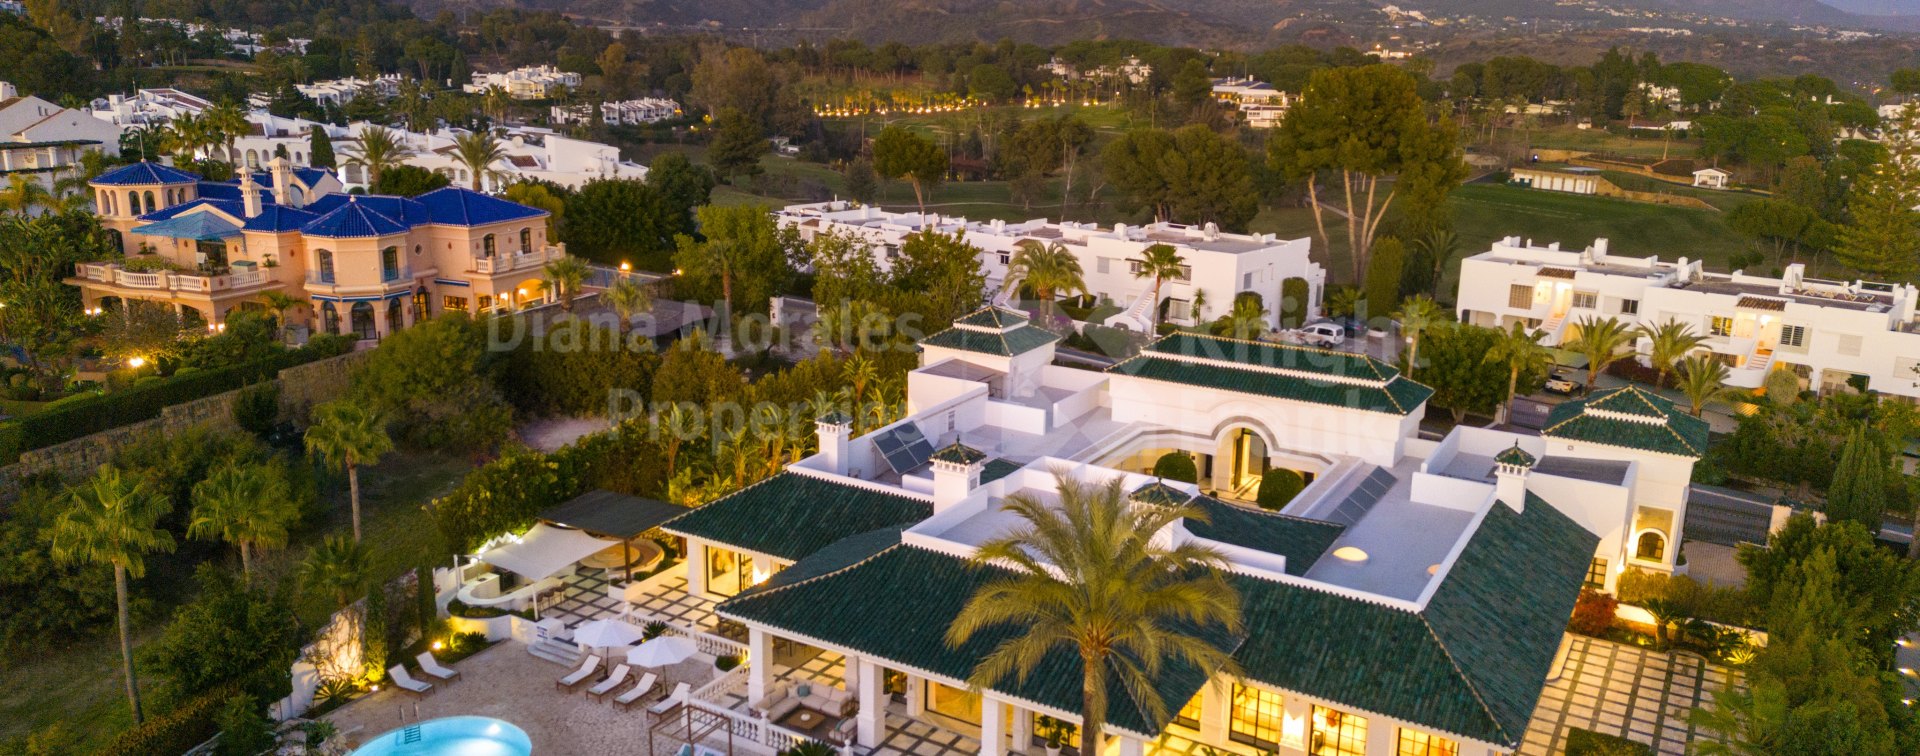 Aloha, Alhambra Palace, luxury and sophistication in the Golf Valley